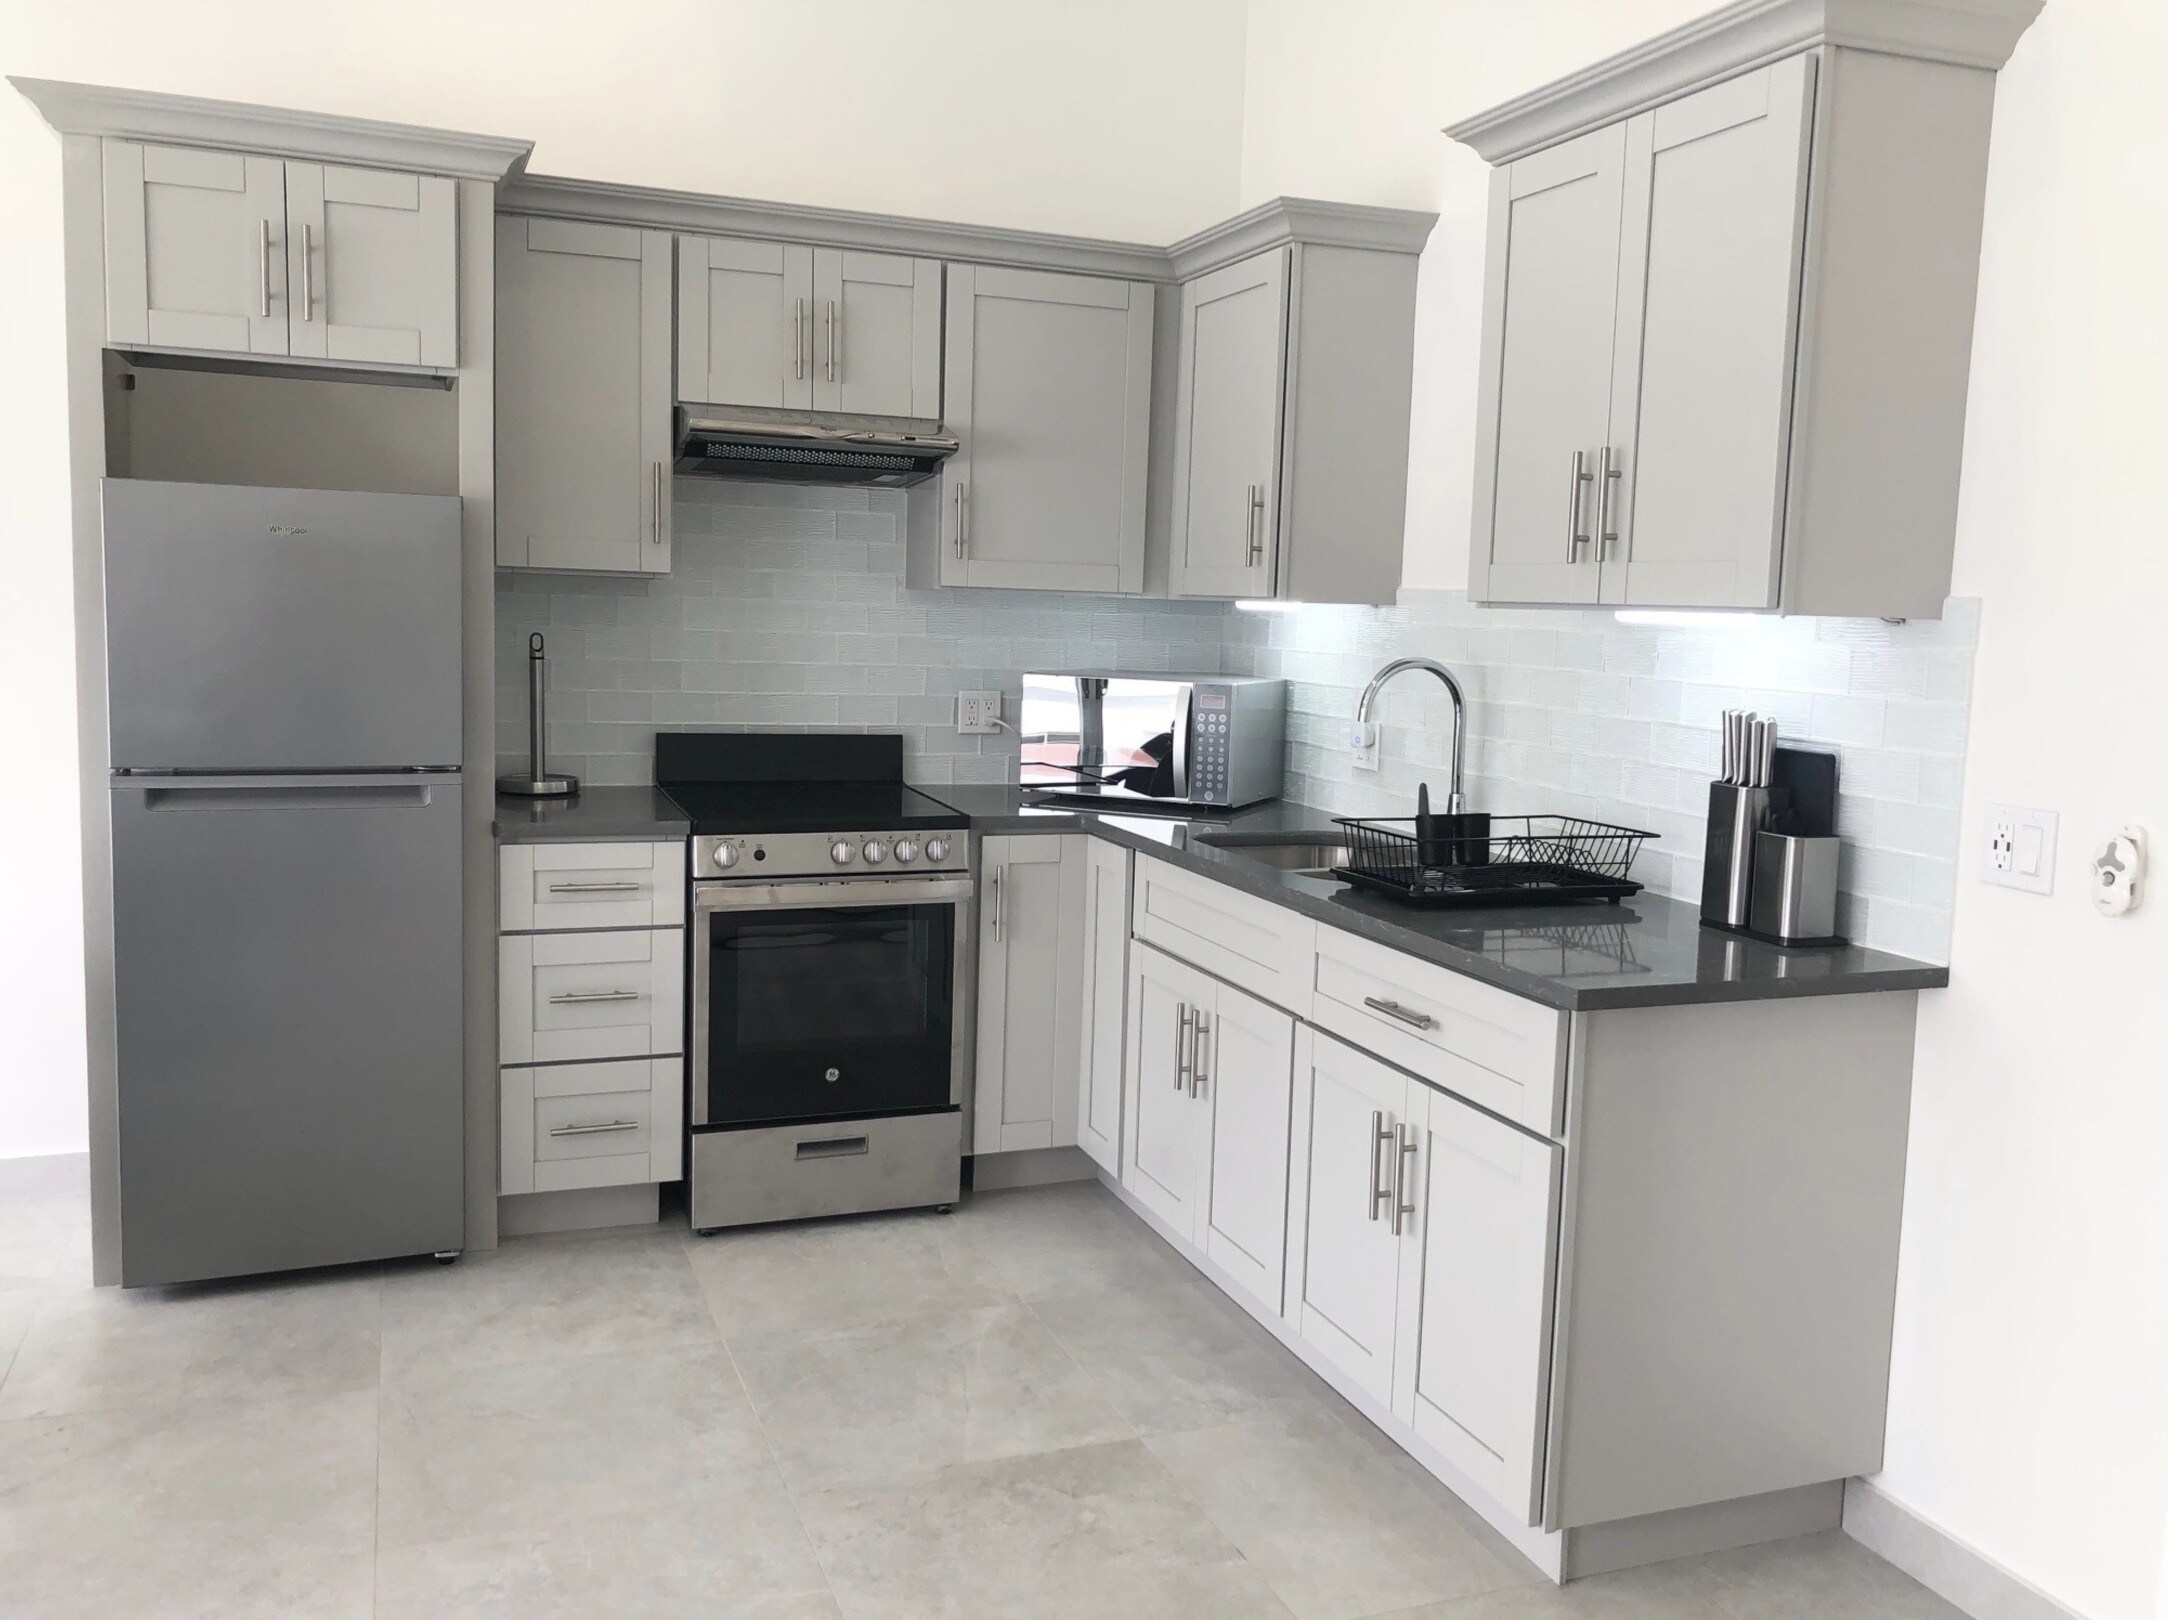 Modern One-Bedroom Apartment with a simple, bright open kitchen with good cabinet space and modern appliances at Jolly Harbour Villa rentals, Antigua 